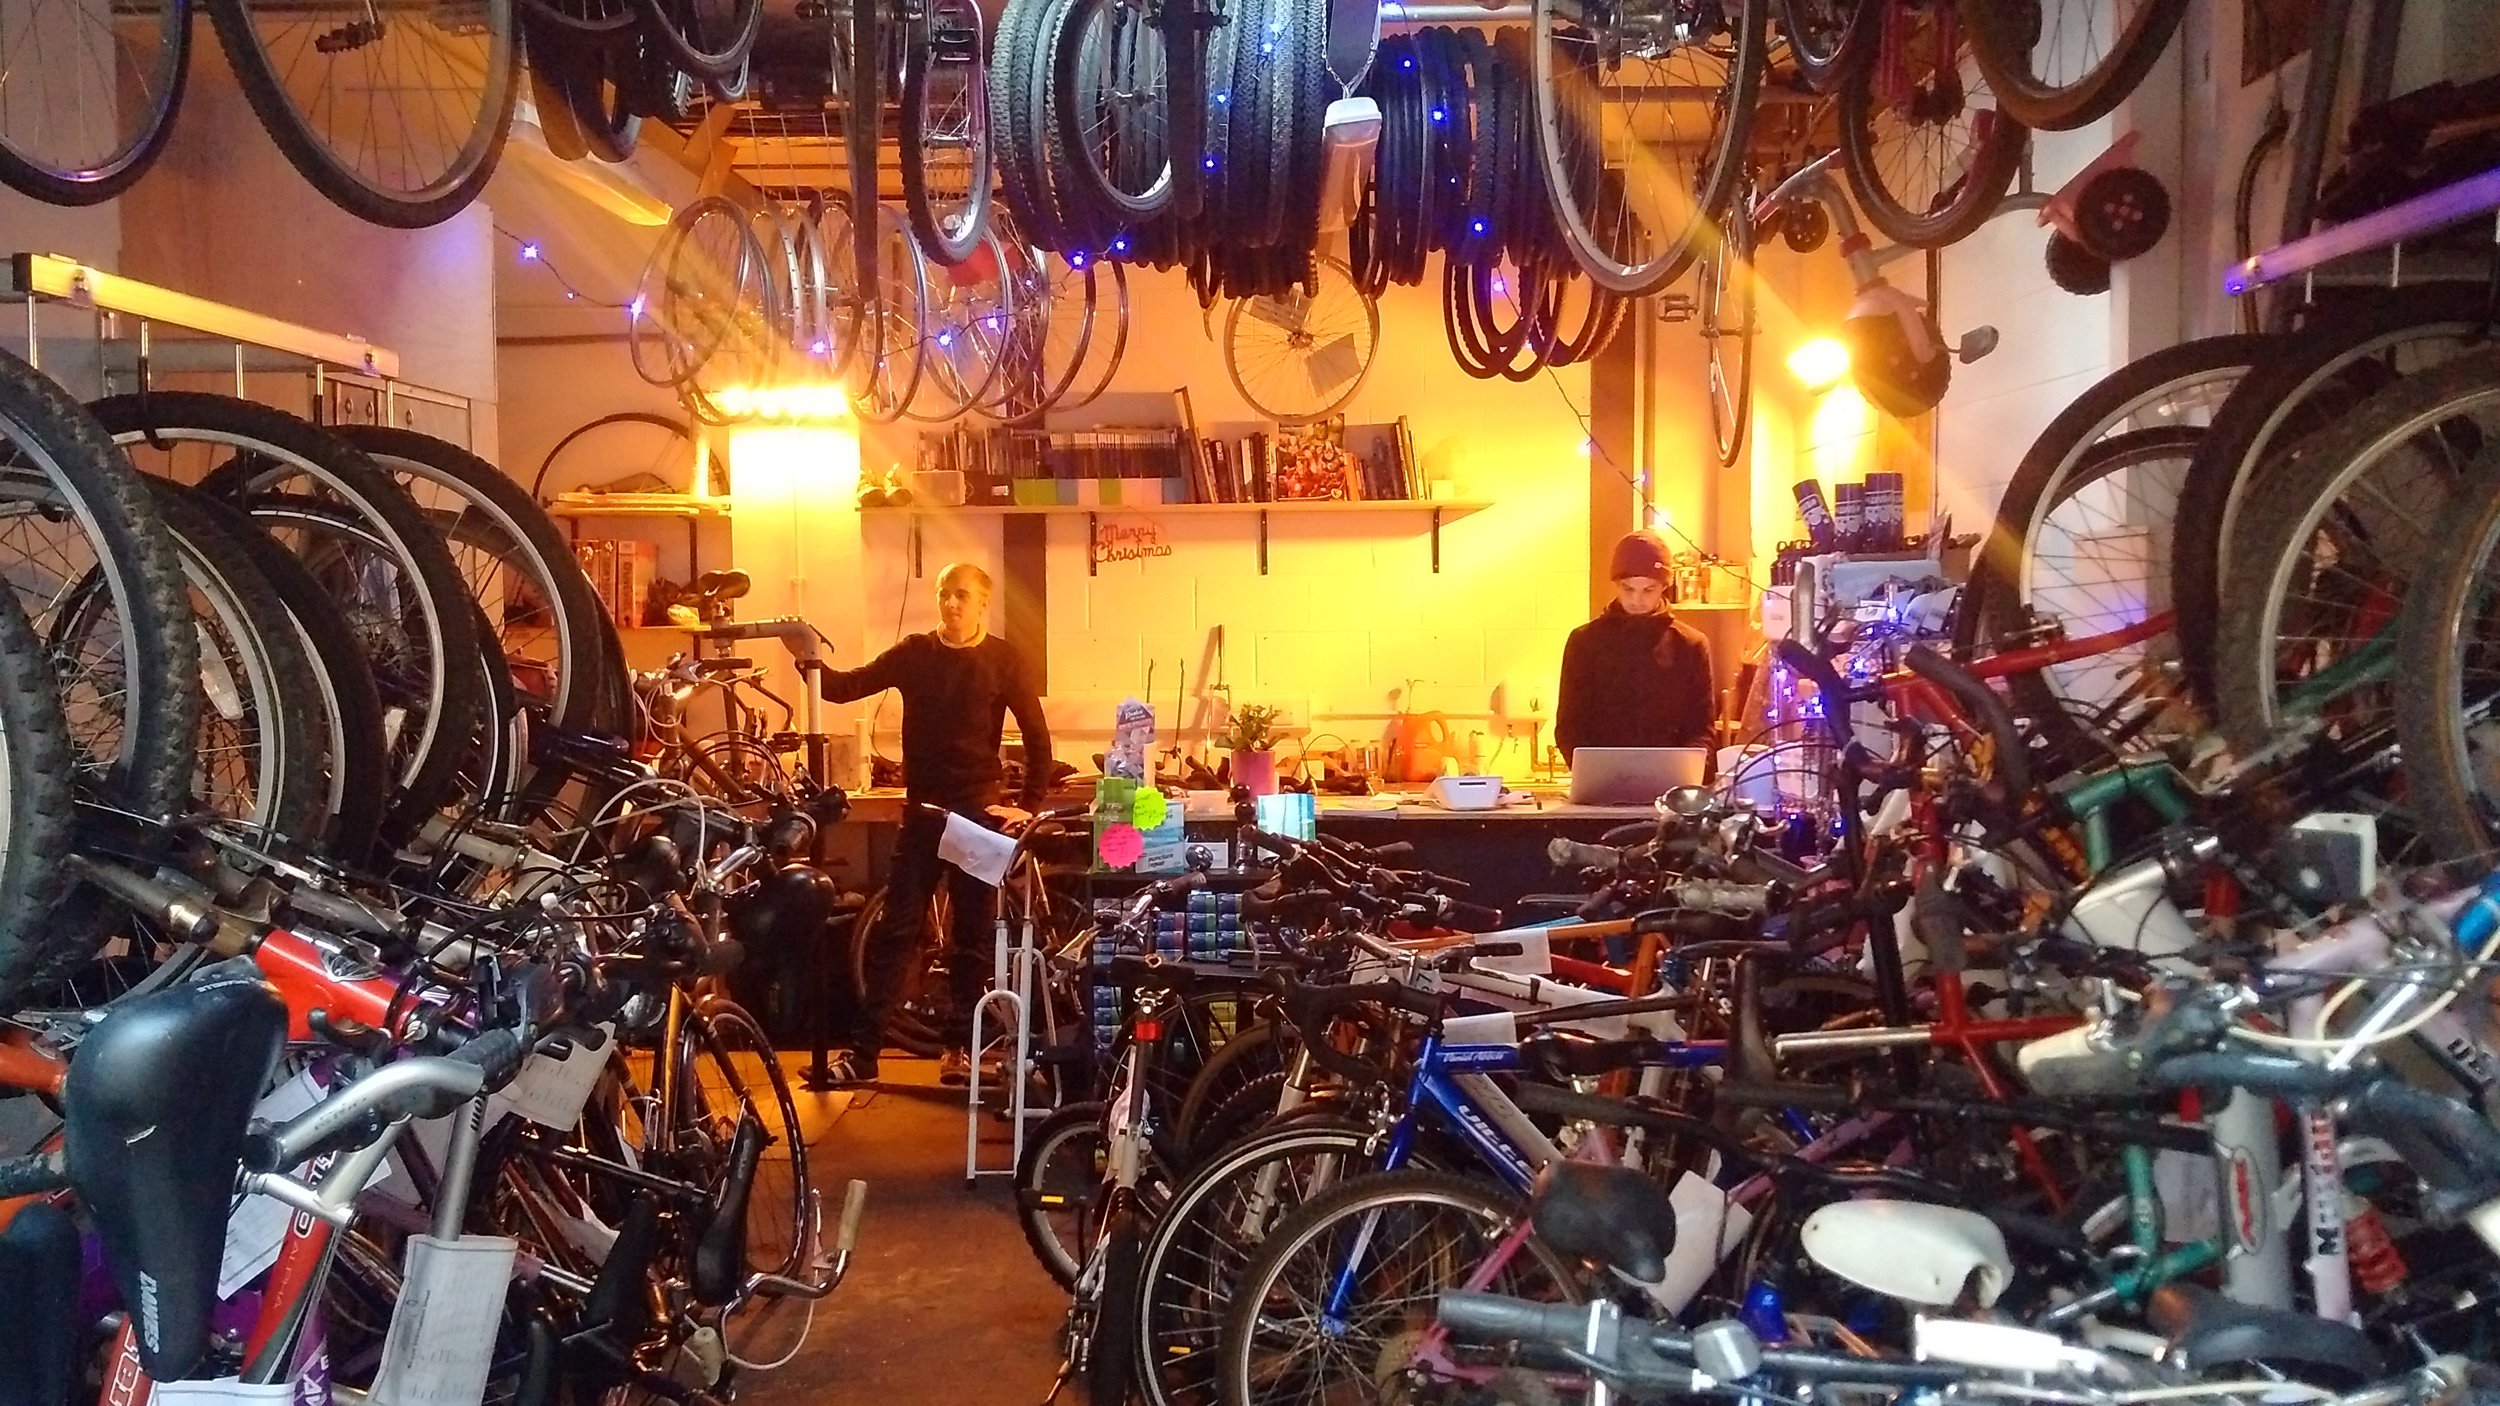 Russell's Bicycle Shed